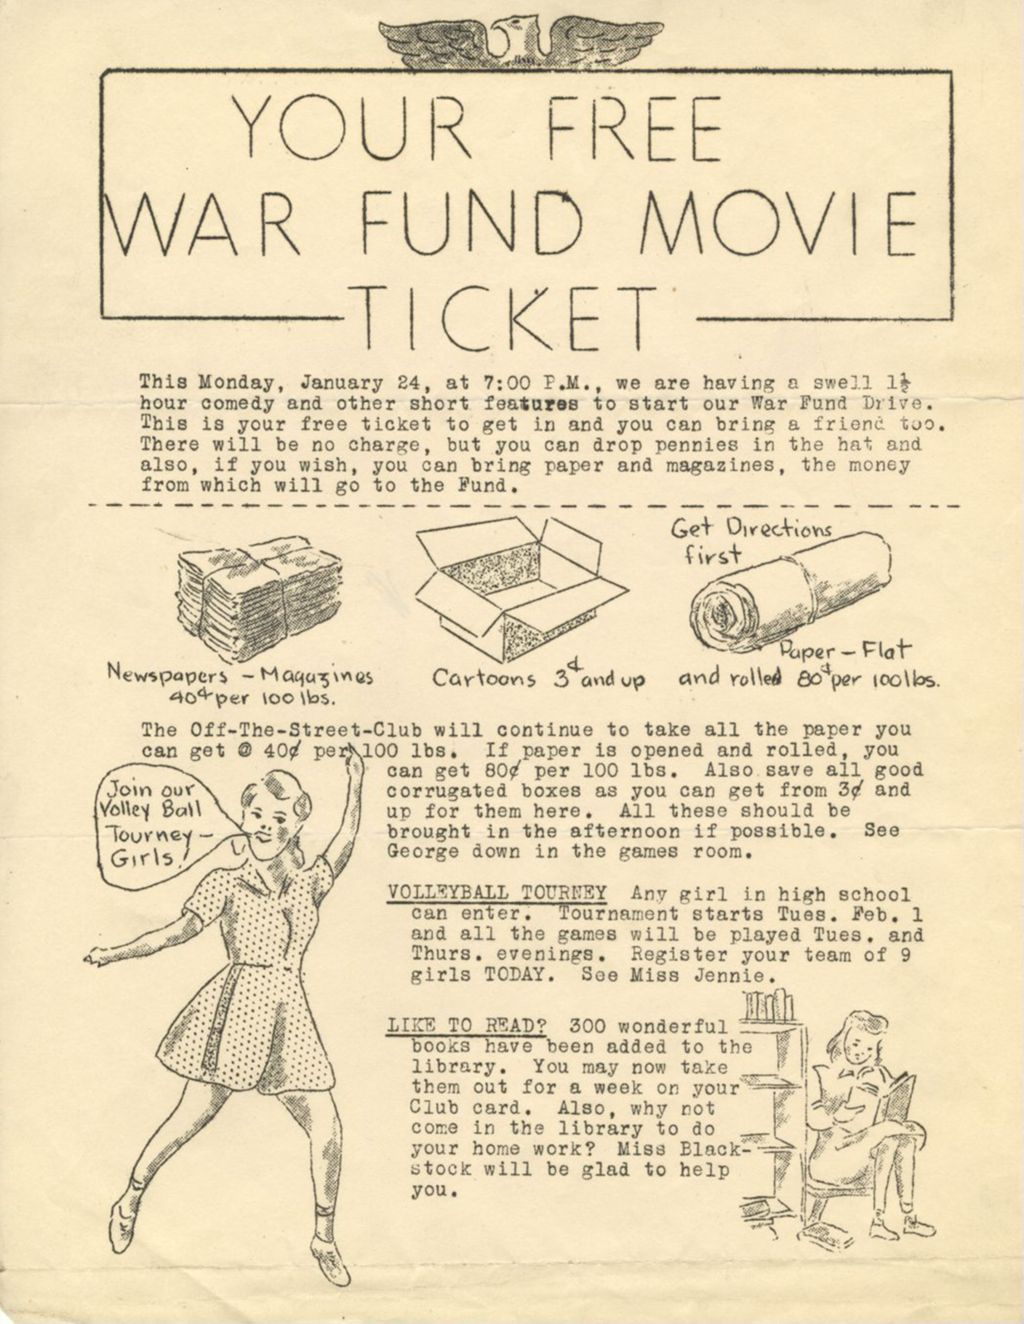 Miniature of Off-The-Street Club flyer with free War Fund movie ticket